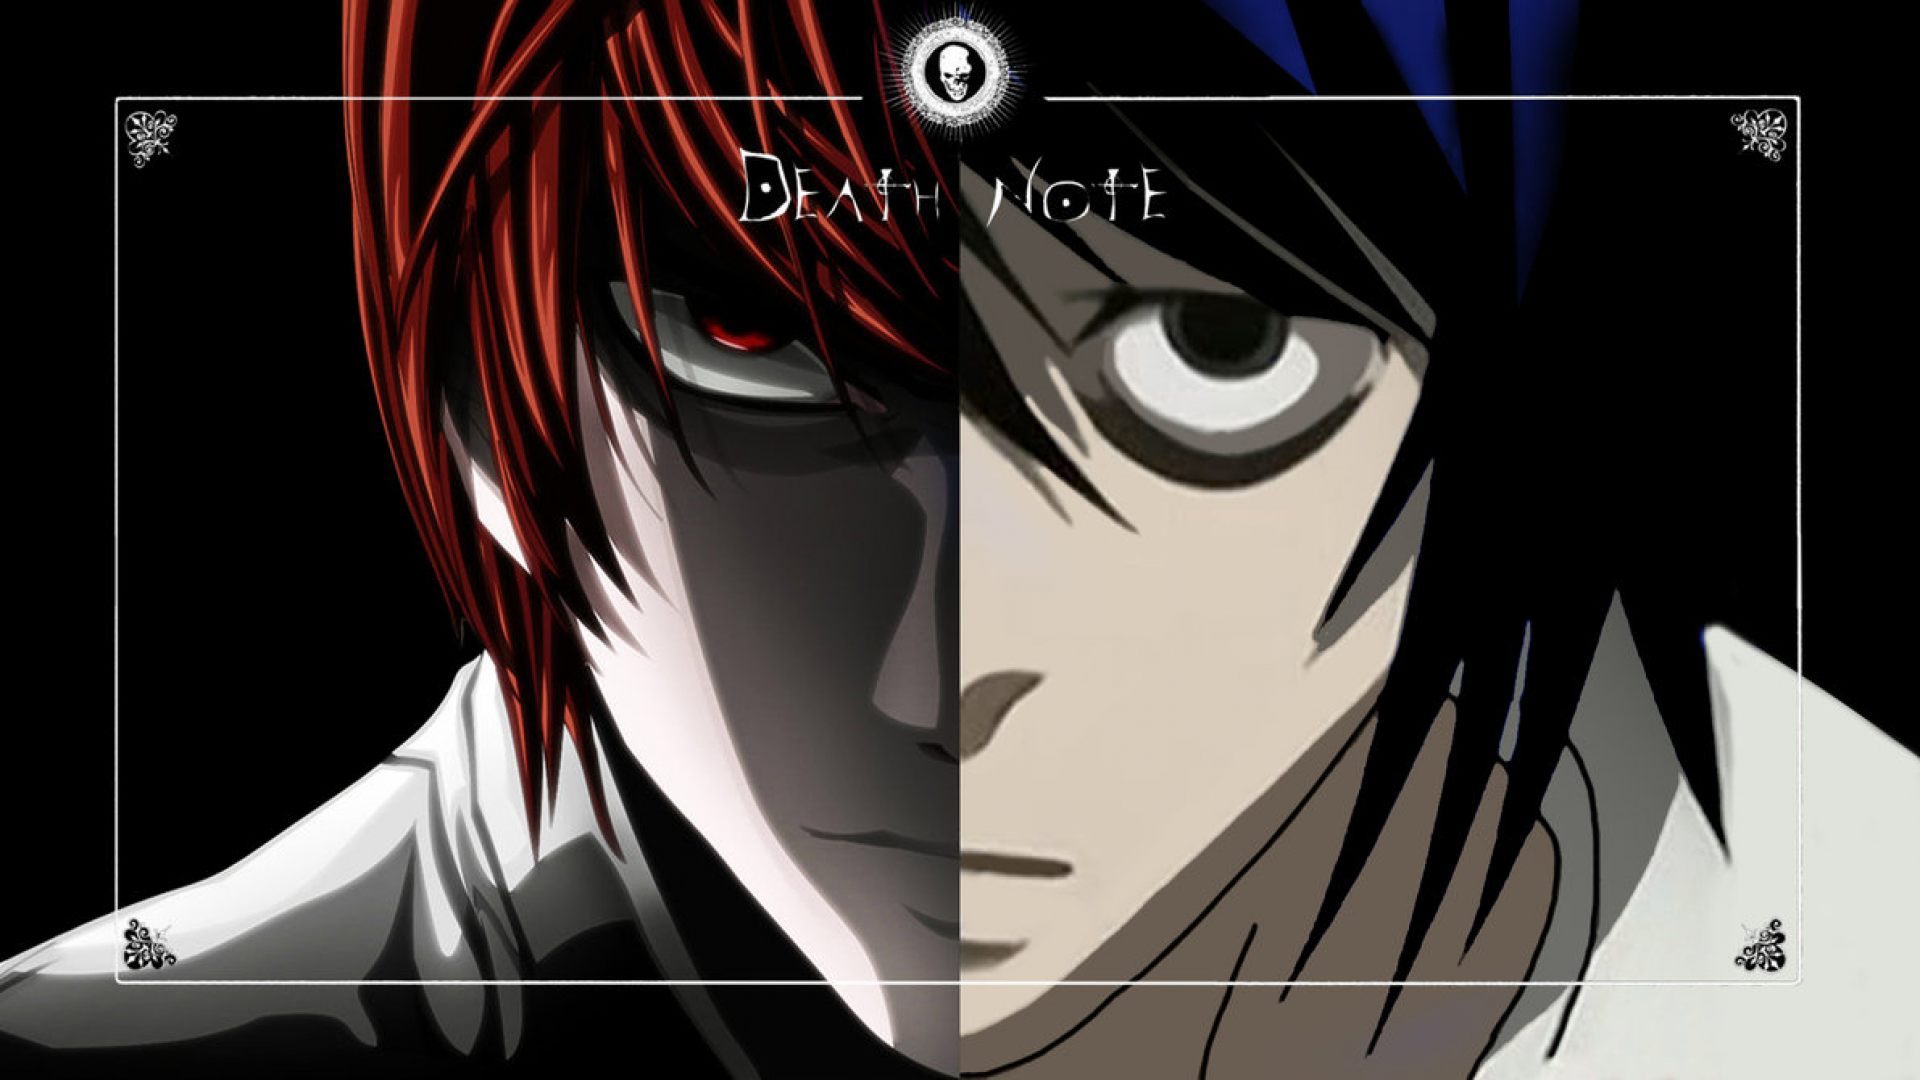 Death Note Black Edition Volume 4 Review by Deffinition as part of Manga Talk